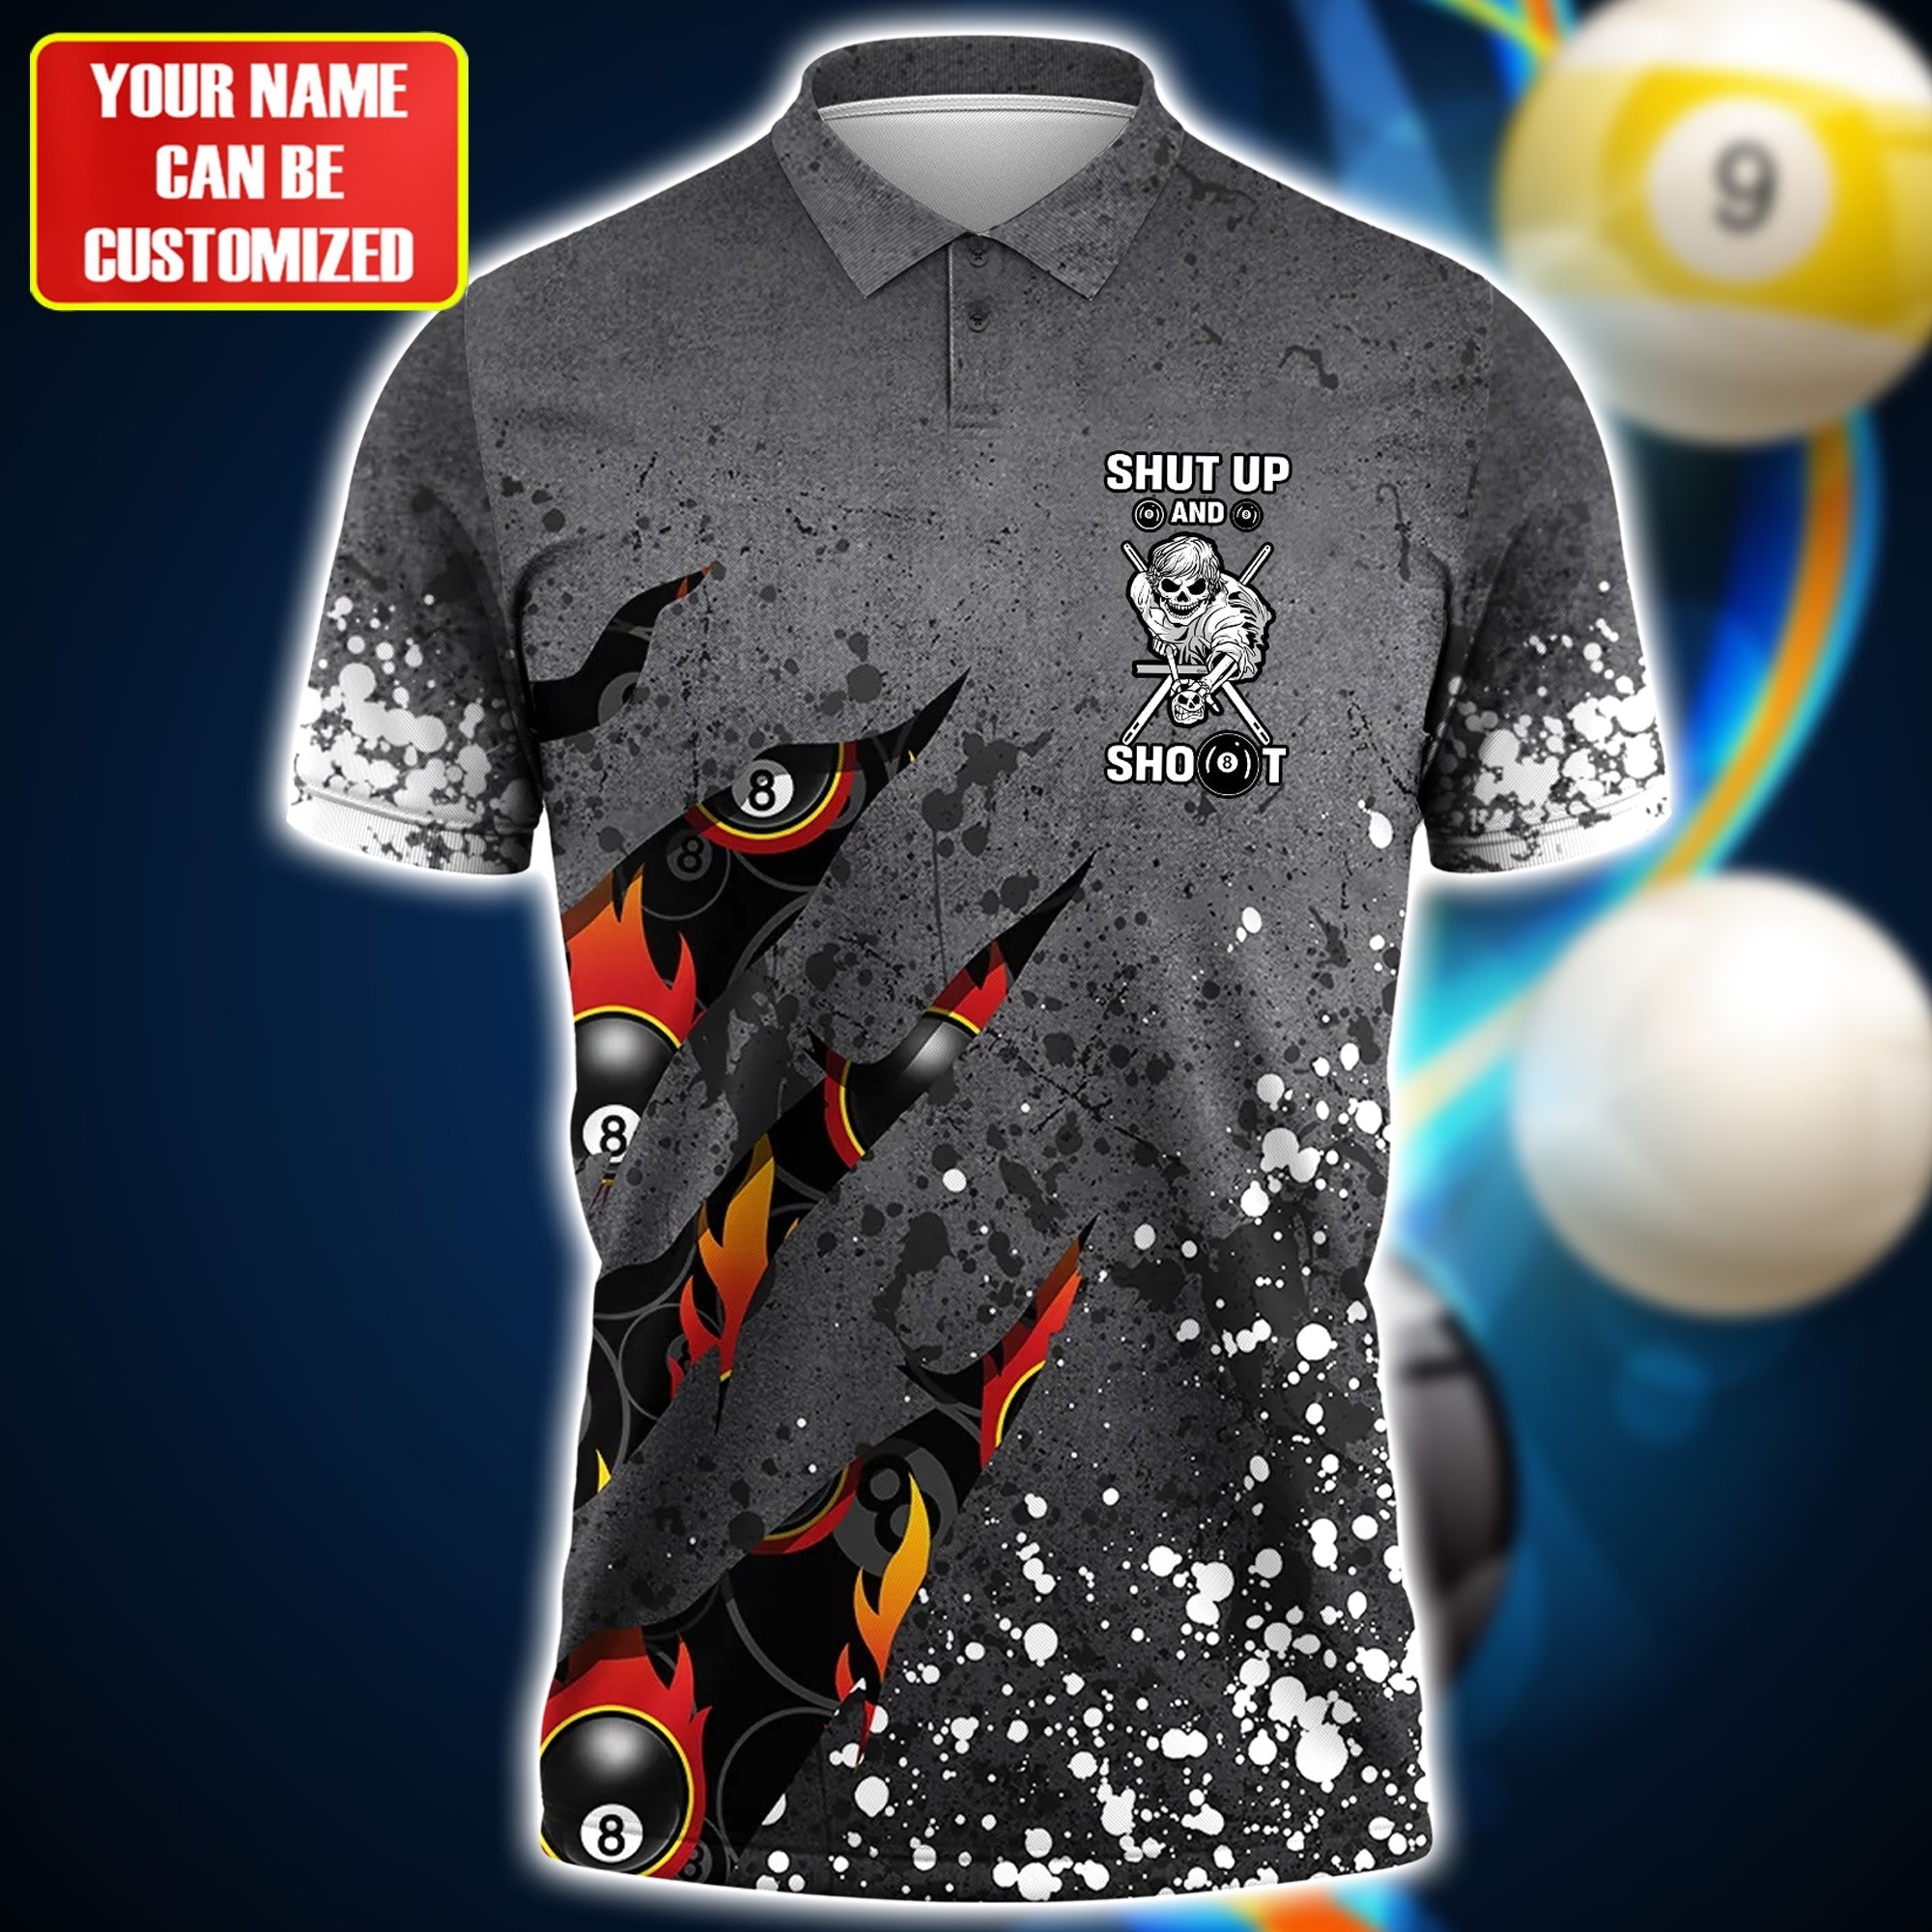 Personalized Name Billiard Pool 8 Ball Shut up and shoot 3D Shirt For Billiard Players